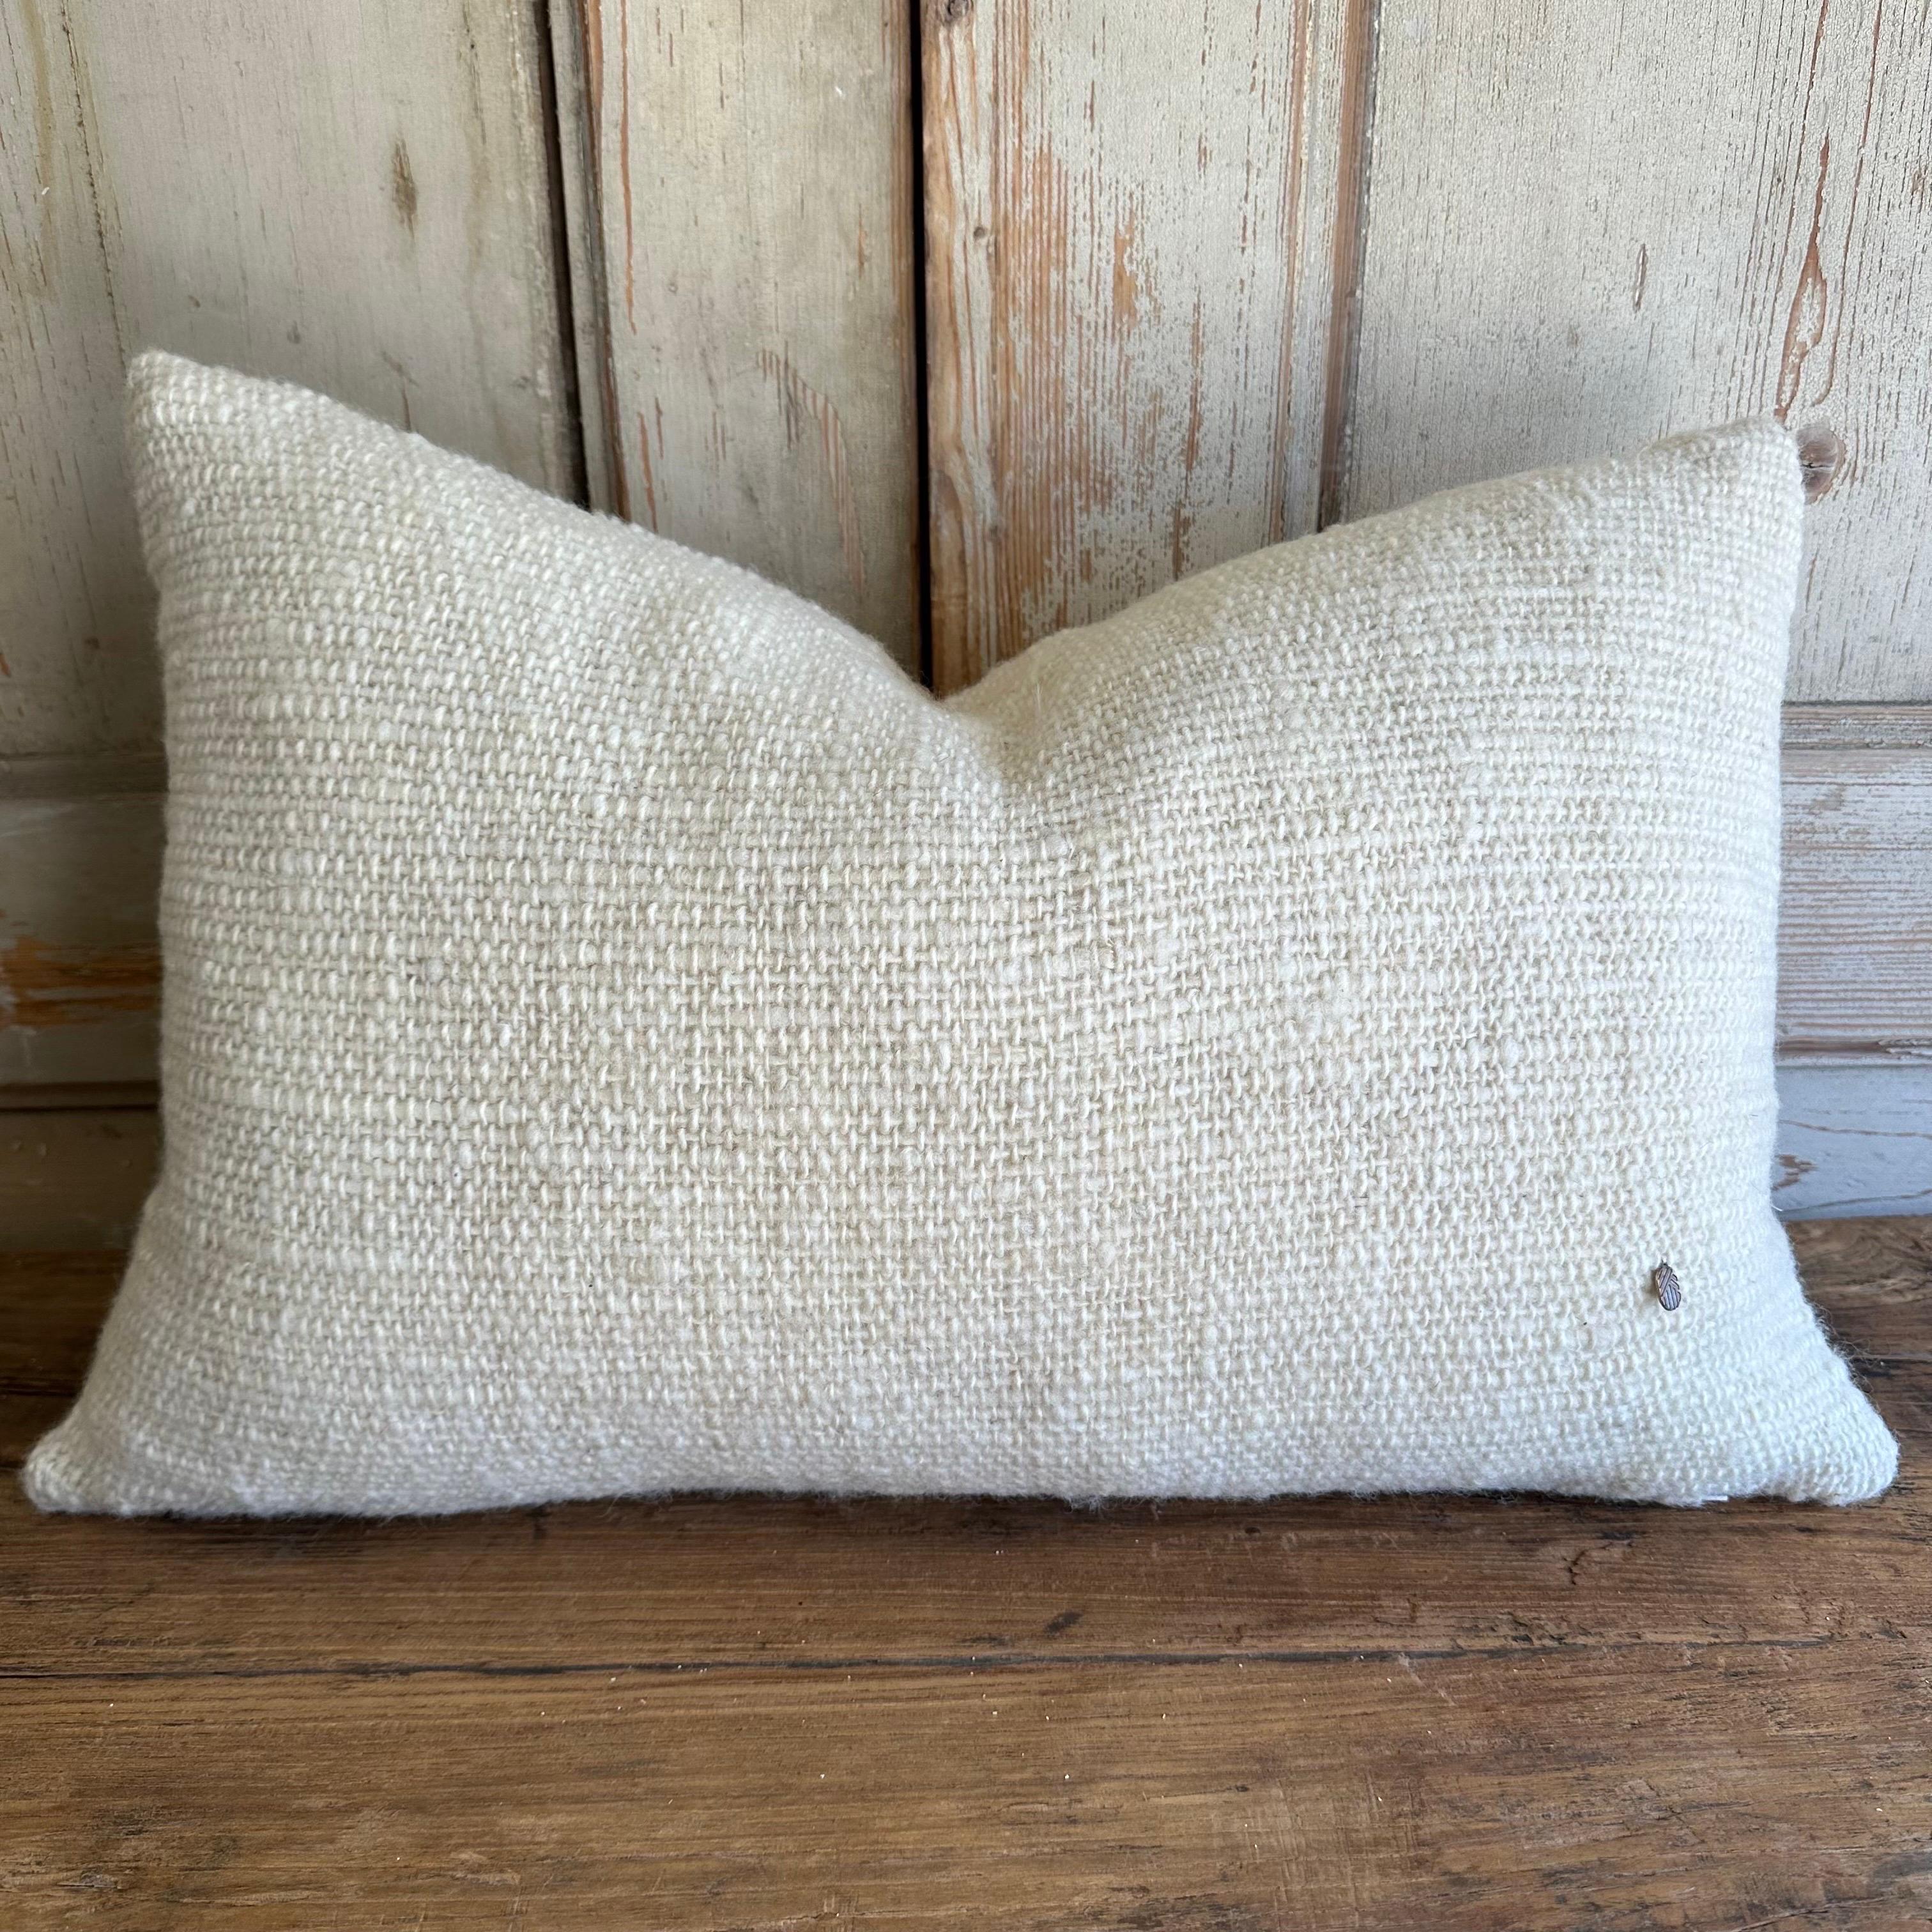 Nikko Hand Made Wool Pillow with Zig Zag Stitching In New Condition For Sale In Brea, CA